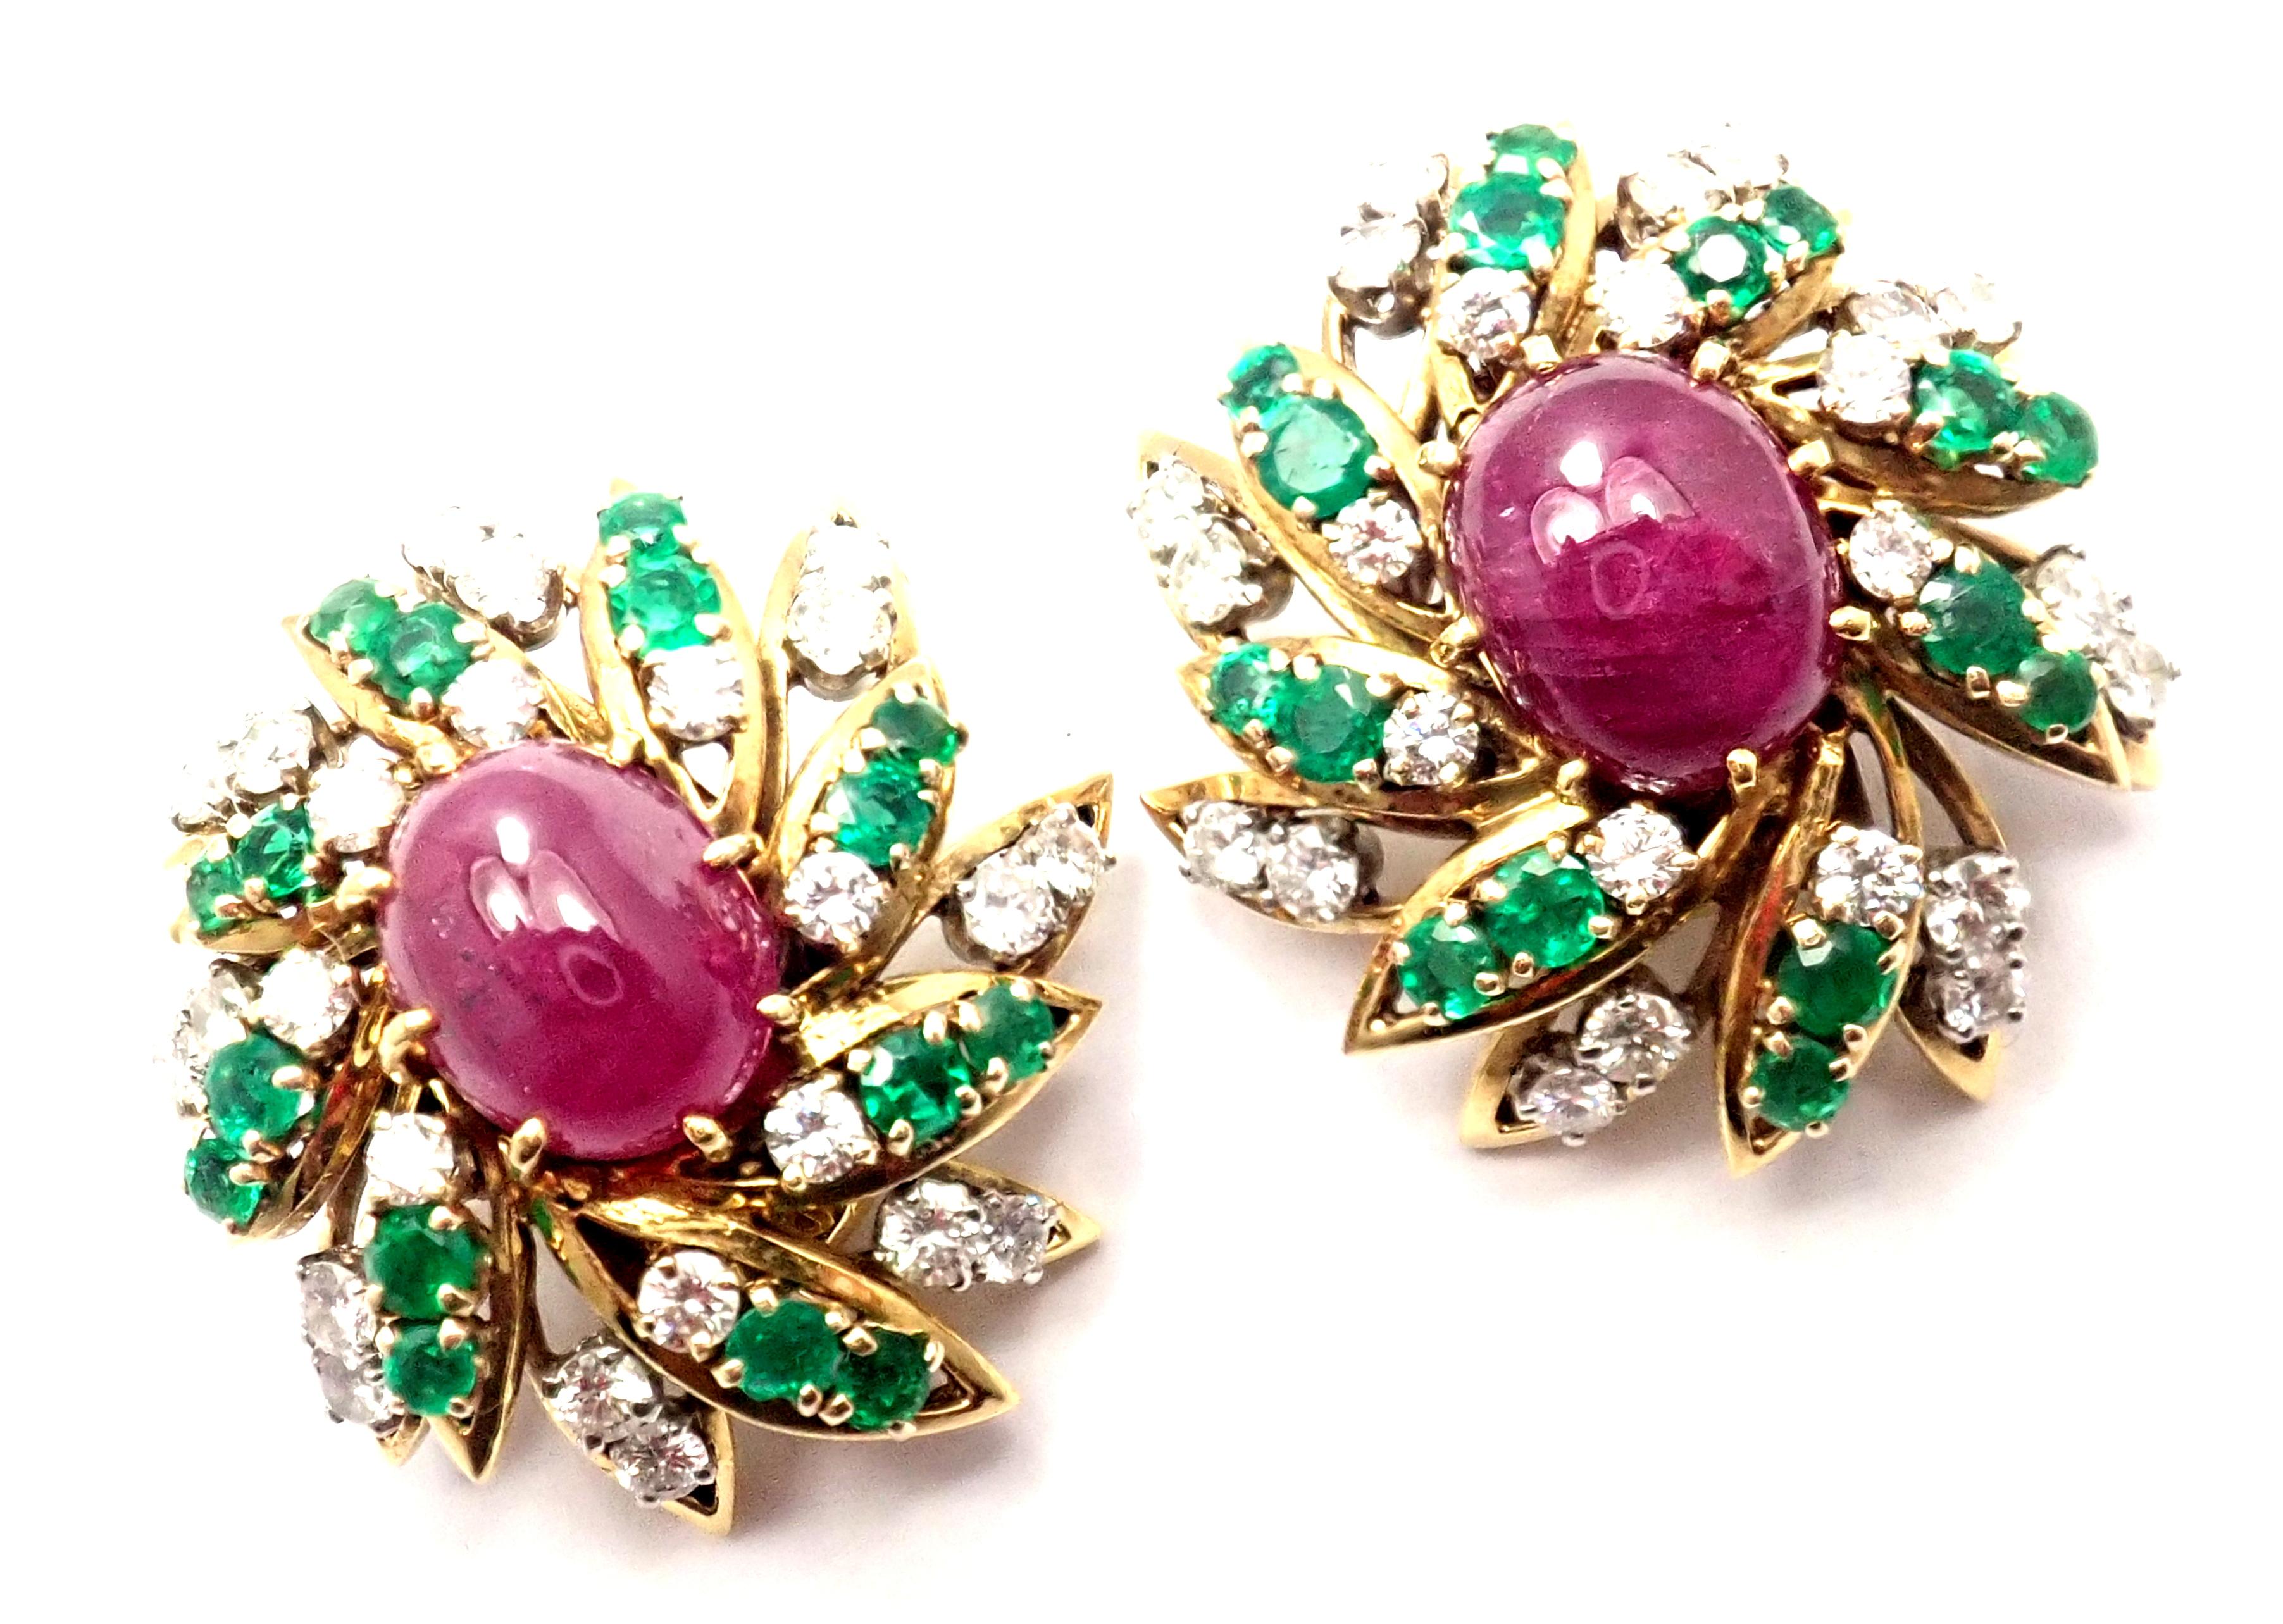 18k Yellow Gold And Platinum Large Oval Rubies, Diamond and Emerald Earrings by David Webb.
With Round brilliant cut diamonds VS1 clarity, G color total weight approx. 3ct
Emeralds total weight approx. 1.4ct
2 oval rubies total weight approx.